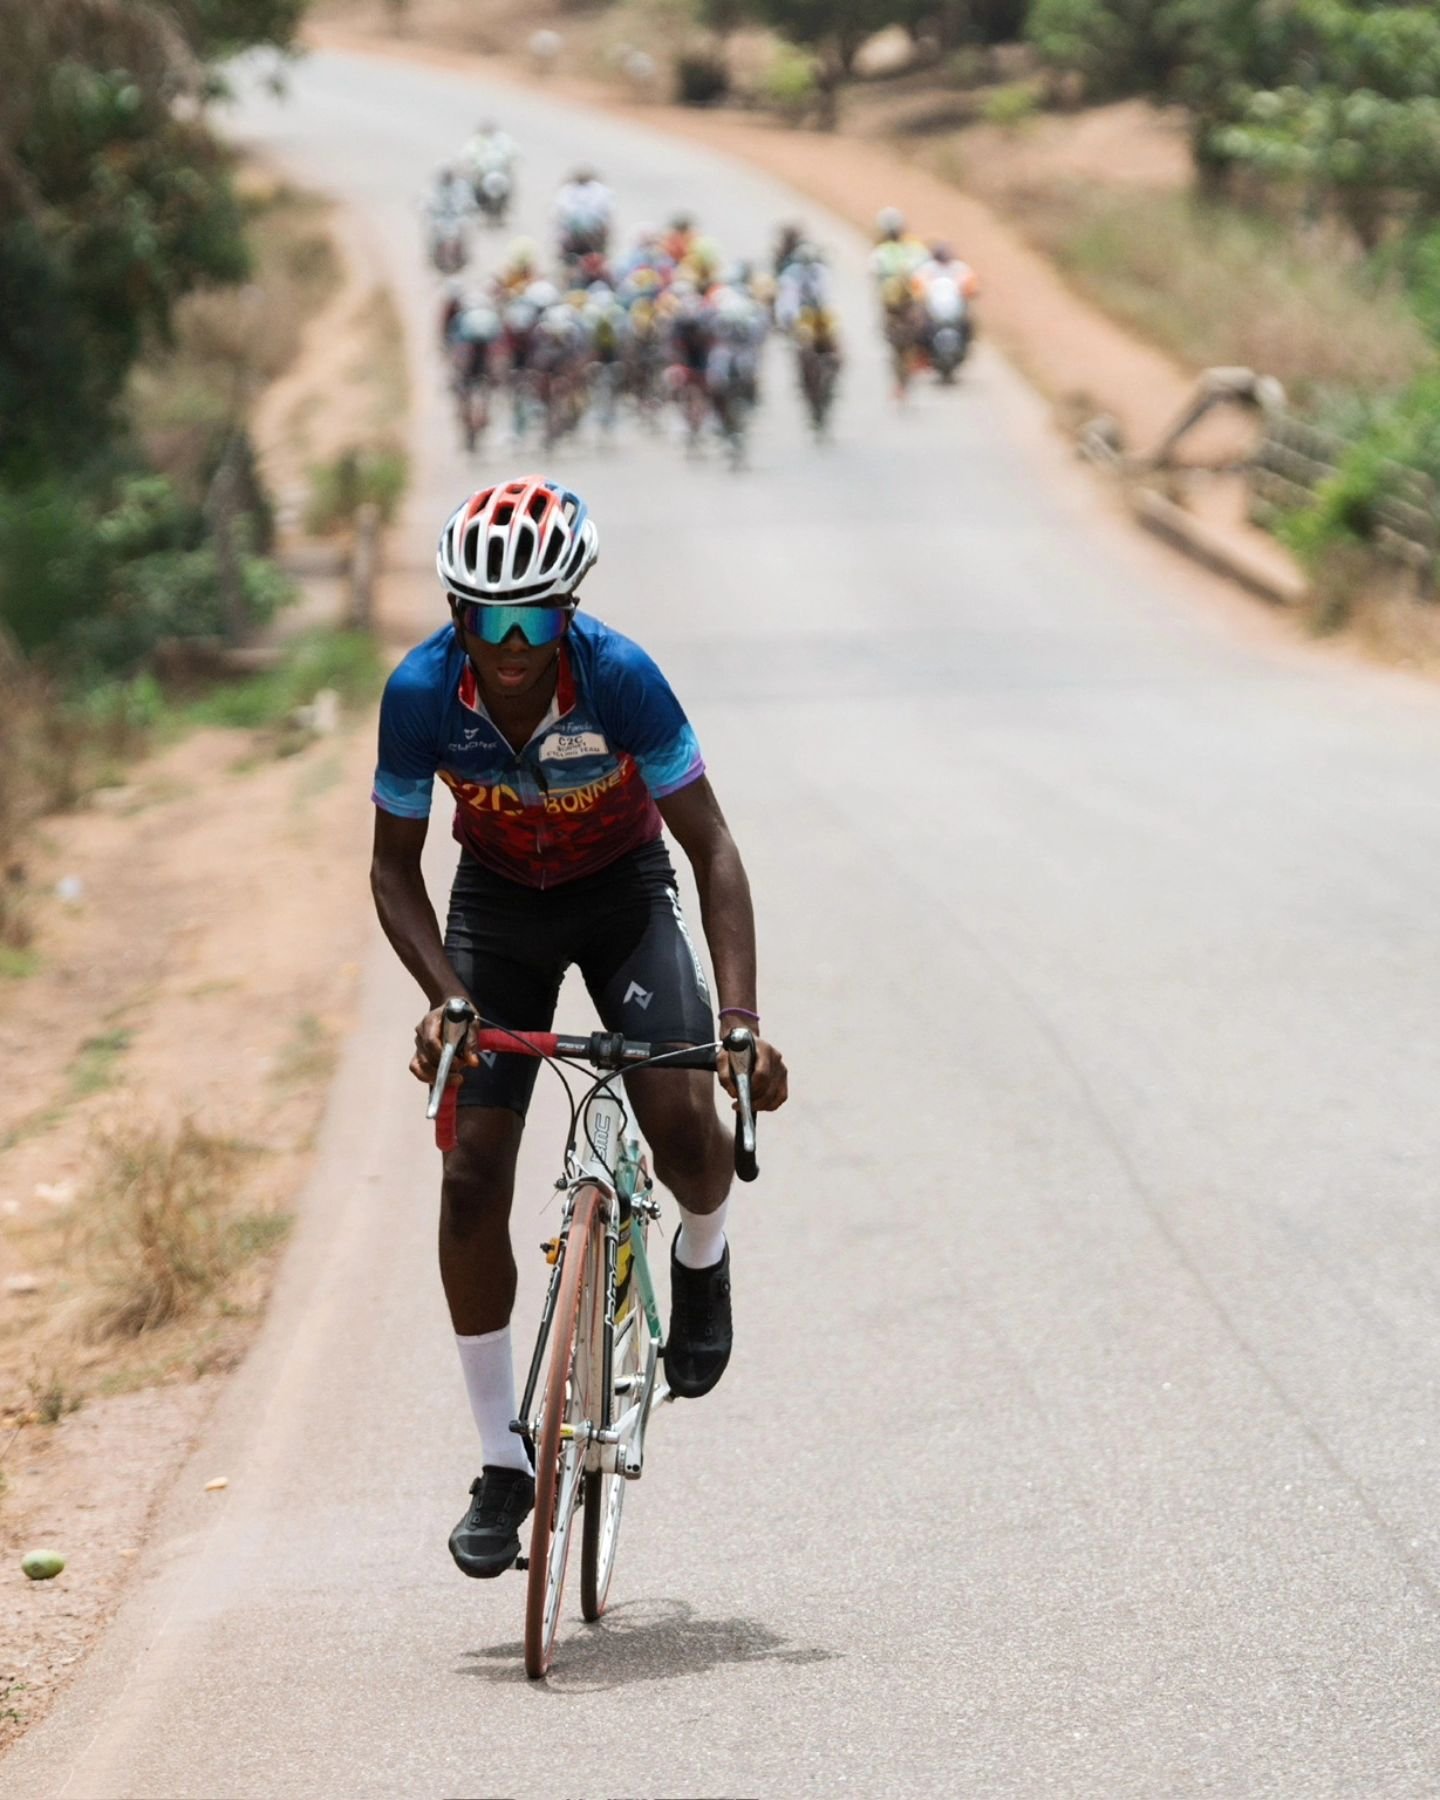 The race is on... 

The Fundsmith Tour de Lunsar finally arrived with a bang. 

@mattgrayson_photo shows us inside the @africap_apparel x @_fambul junior race on day 1.

#TourDeLunsar